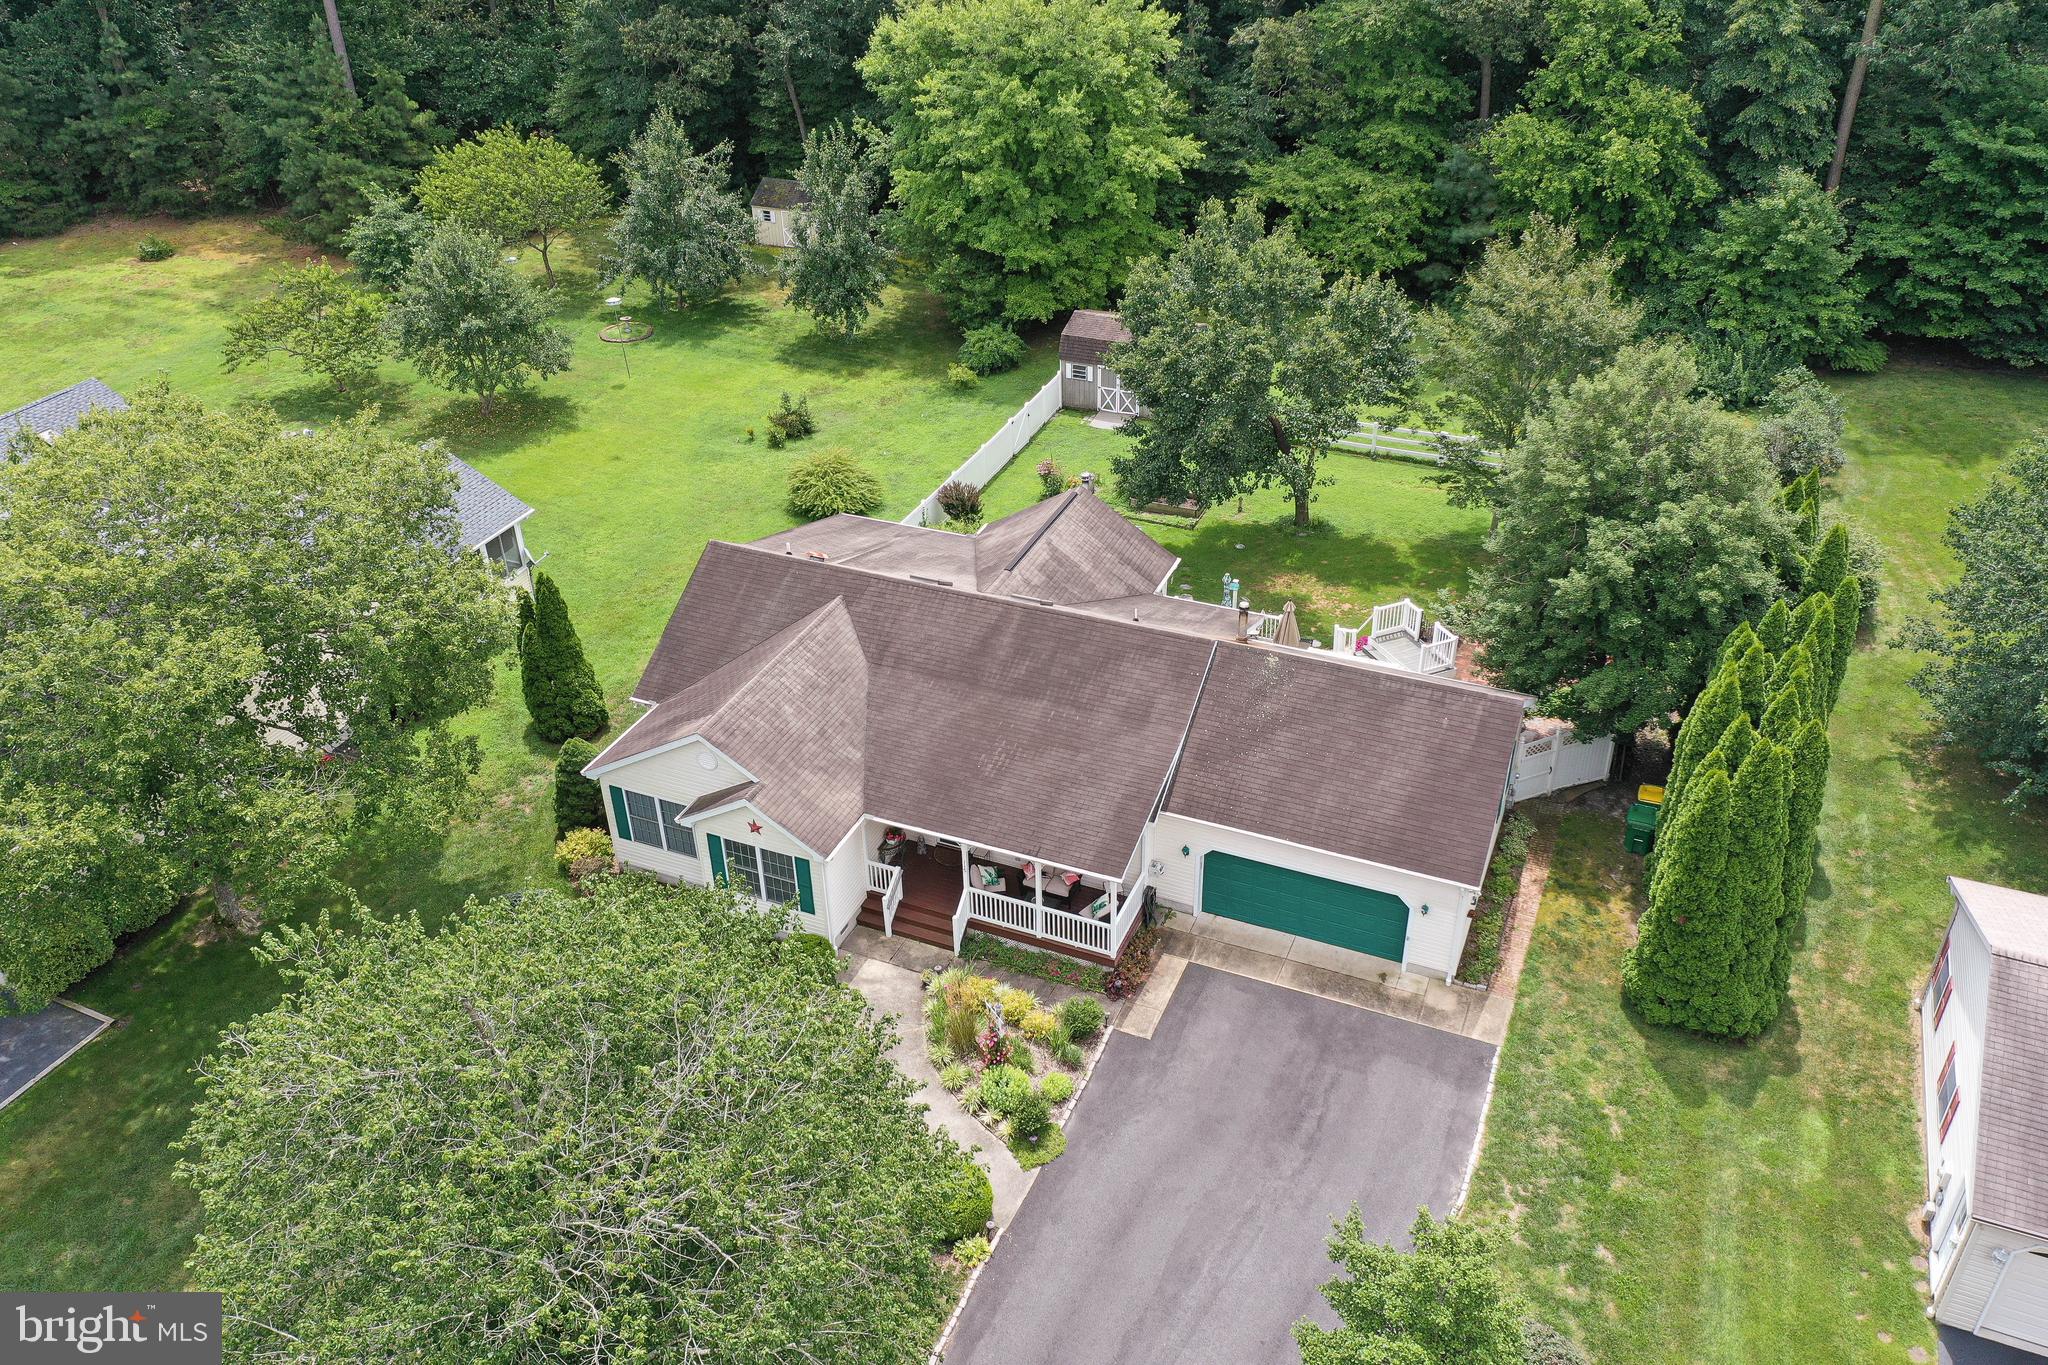 an aerial view of a house with big yard